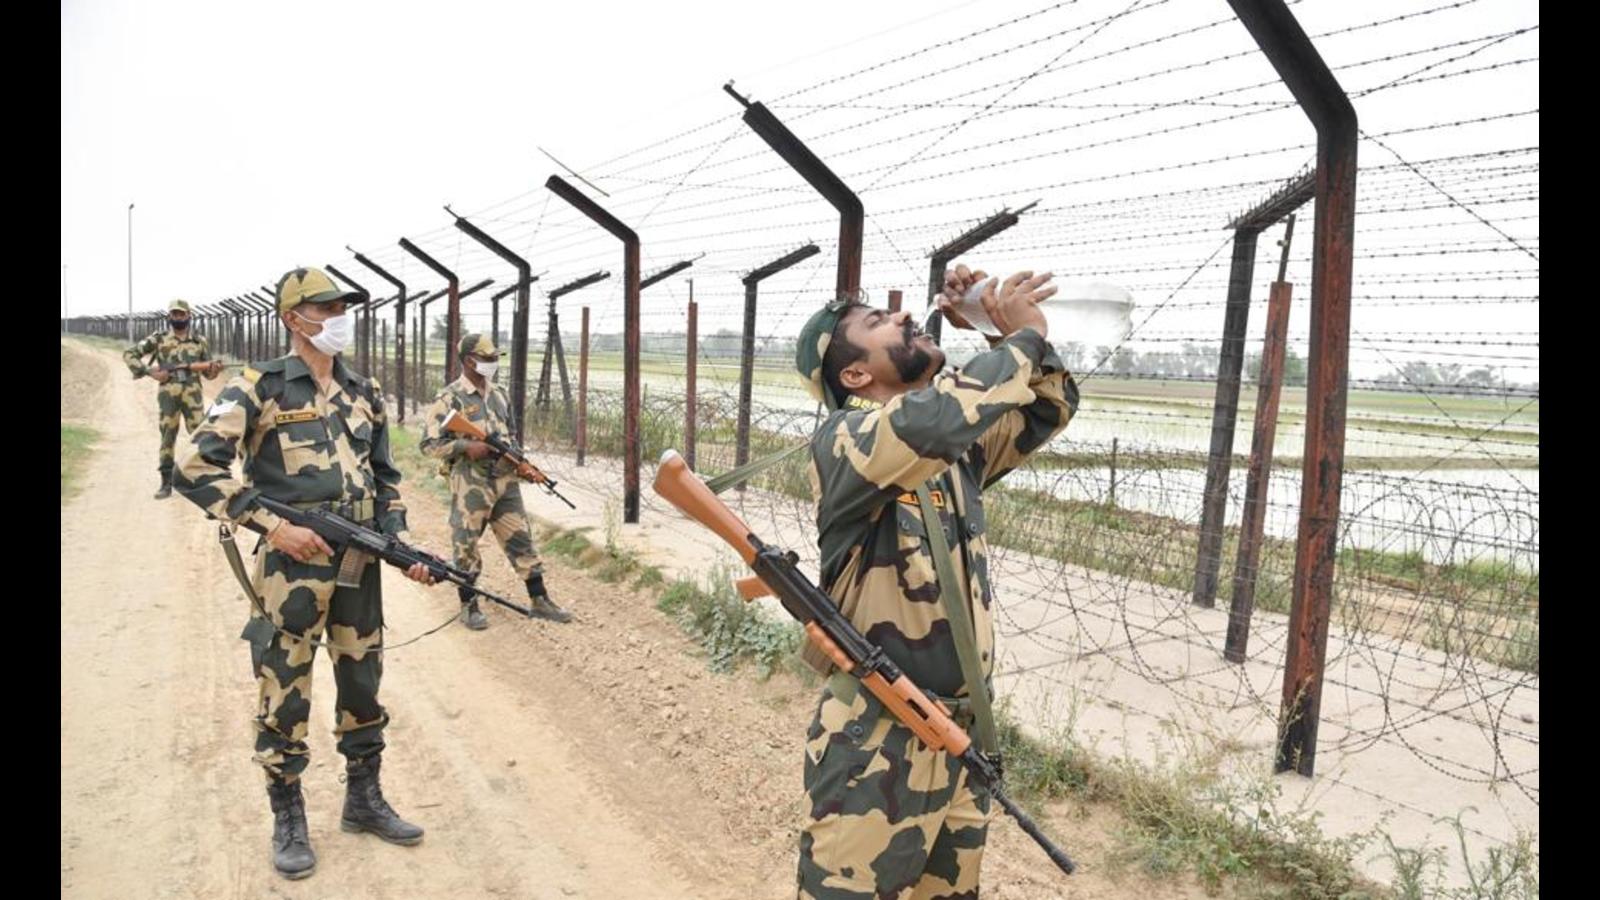 Blazing sun no deterrent to BSF jawans manning barbed fence along Indo-Pak border - Hindustan Times